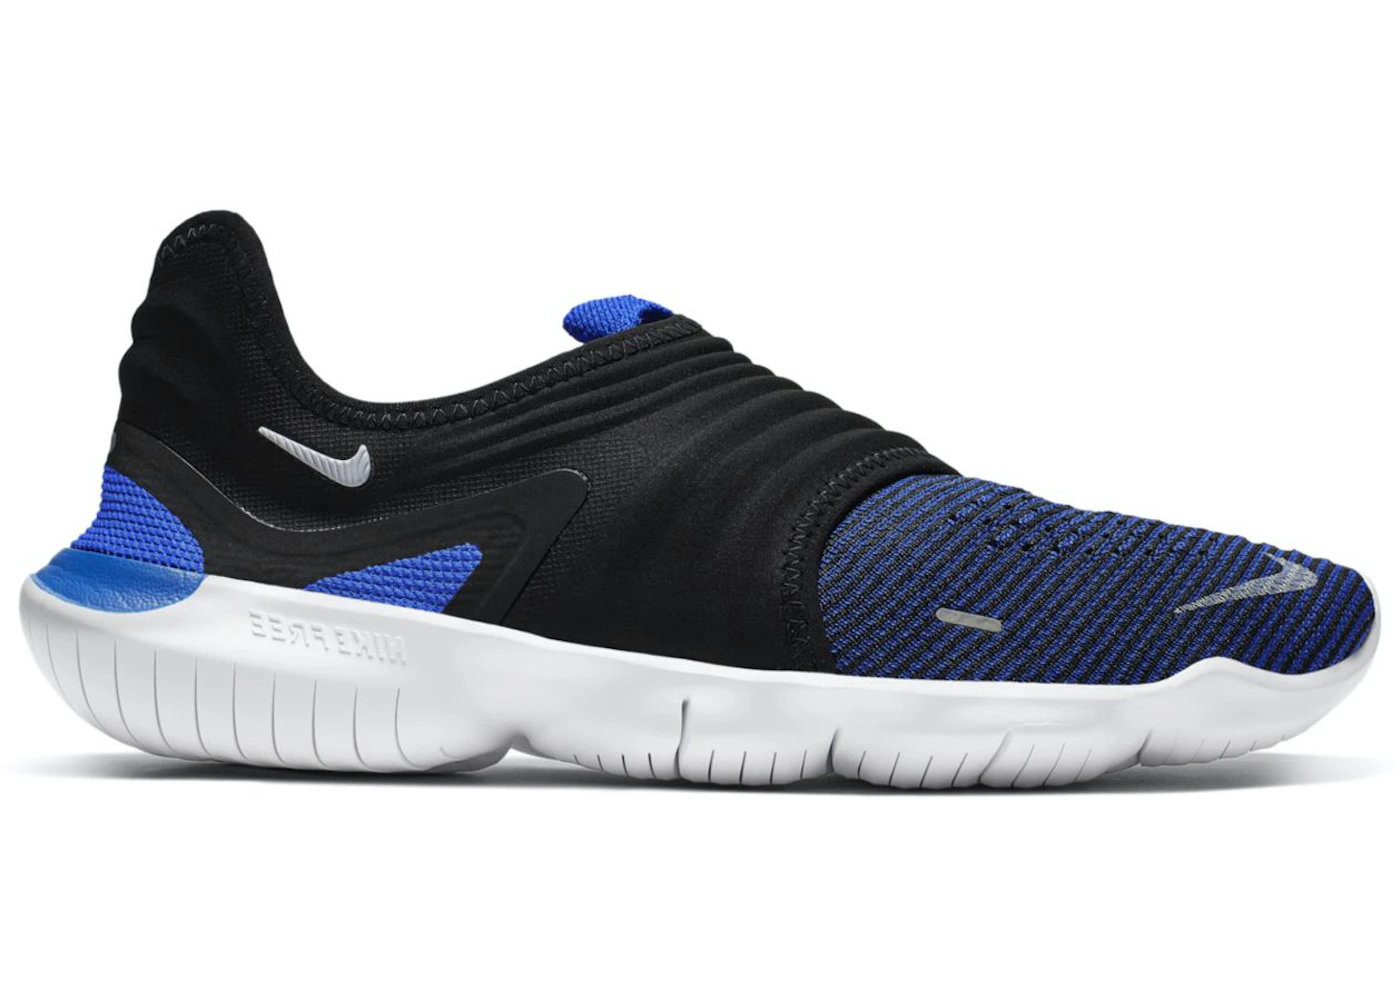 Instituto piloto Cereal Nike Free RN Flyknit 3 Racer Blue - AQ5707-402 - US